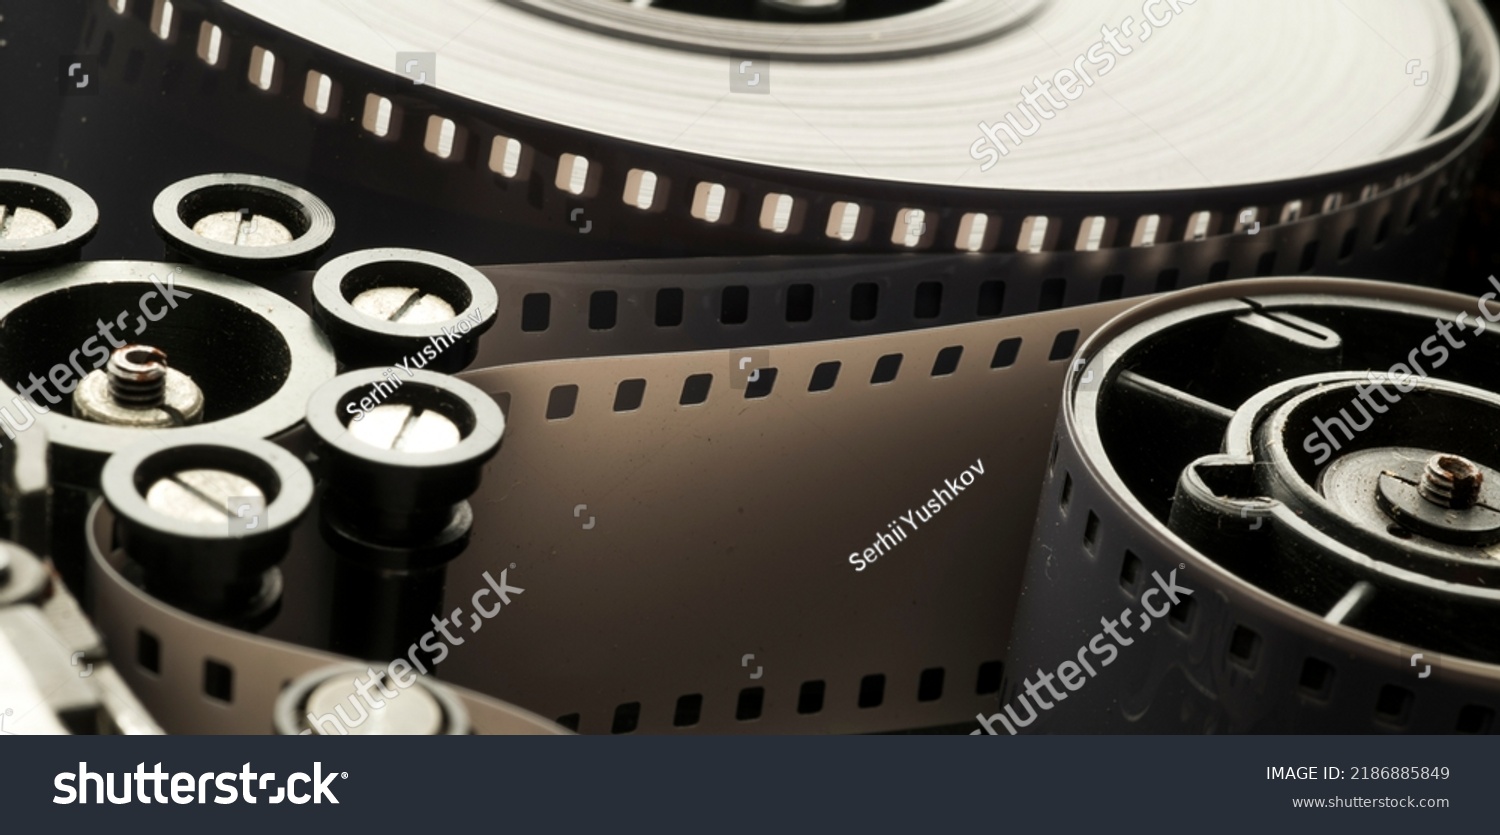 a roll of film in a film camera cassette. negative film in the tape drive mechanism of the cassette. show business film production technology concept #2186885849